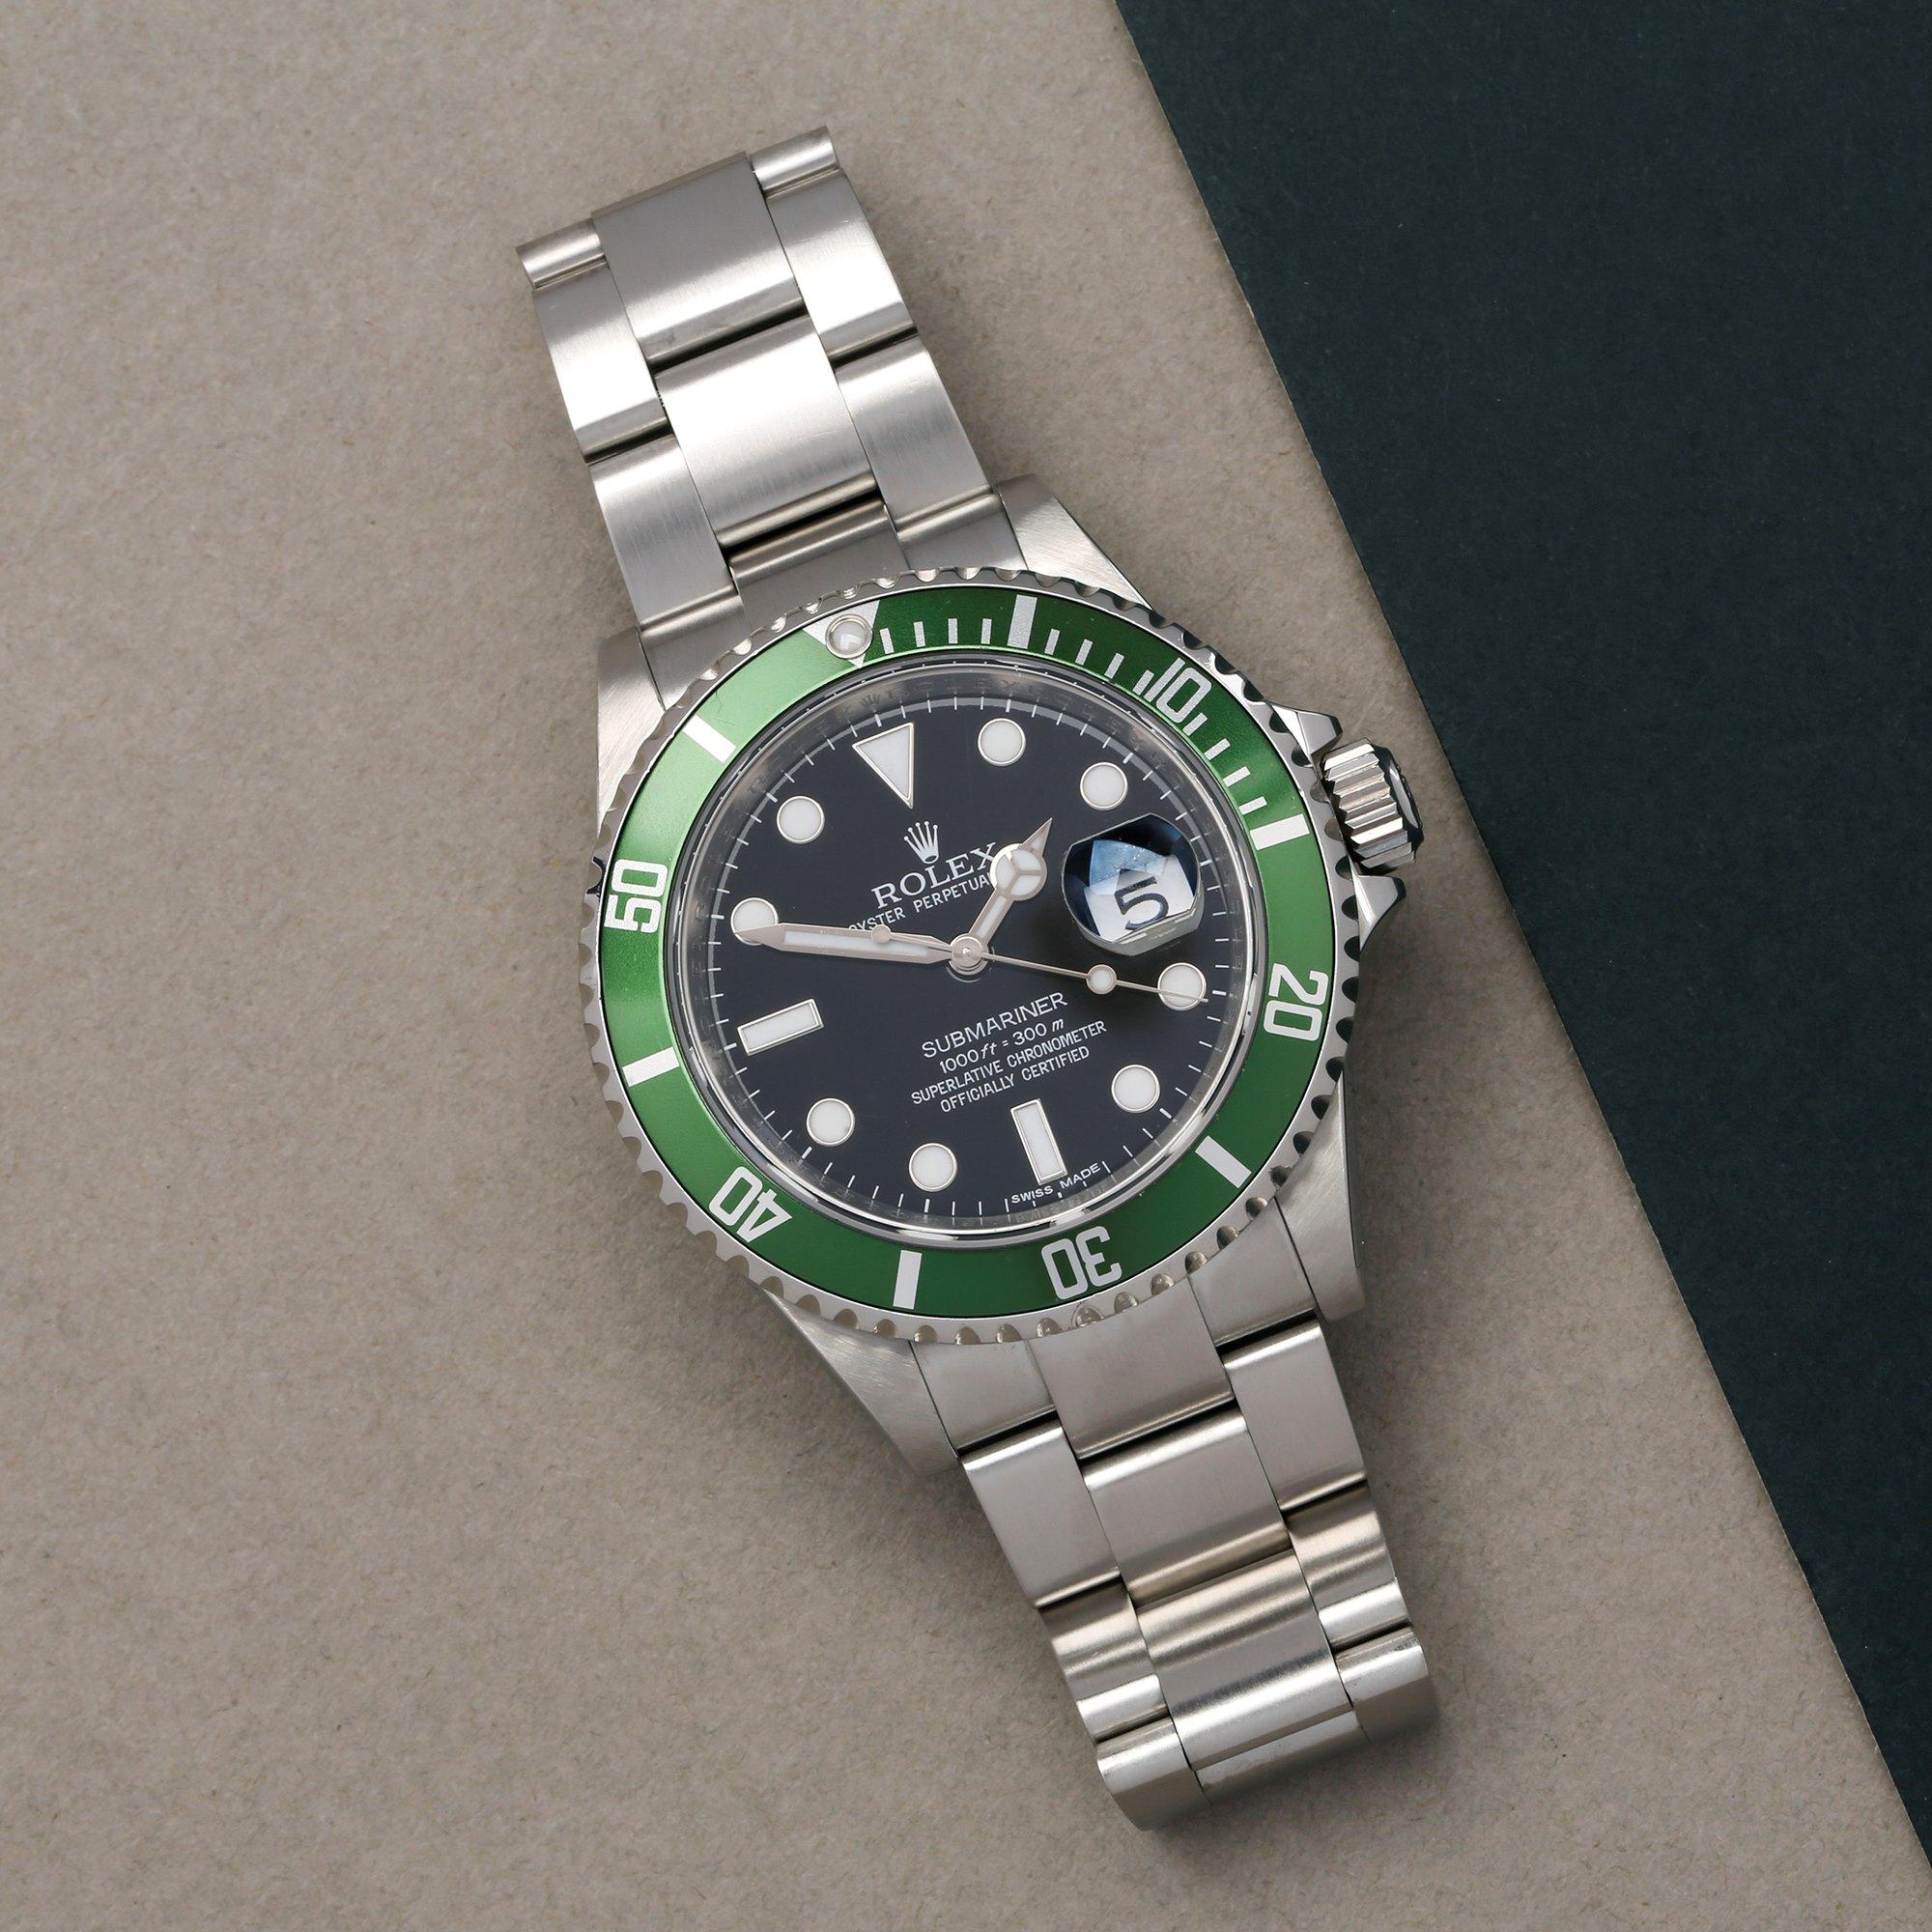 Xupes Reference: W007847
Manufacturer: Rolex
Model: Submariner
Model Variant: Date
Model Number: 16610LV
Age: 17-07-2010
Gender: Men
Complete With: Rolex Box, Manuals,  Service Manual & Guarantee Card
Dial: Black Baton
Glass: Sapphire Crystal
Case